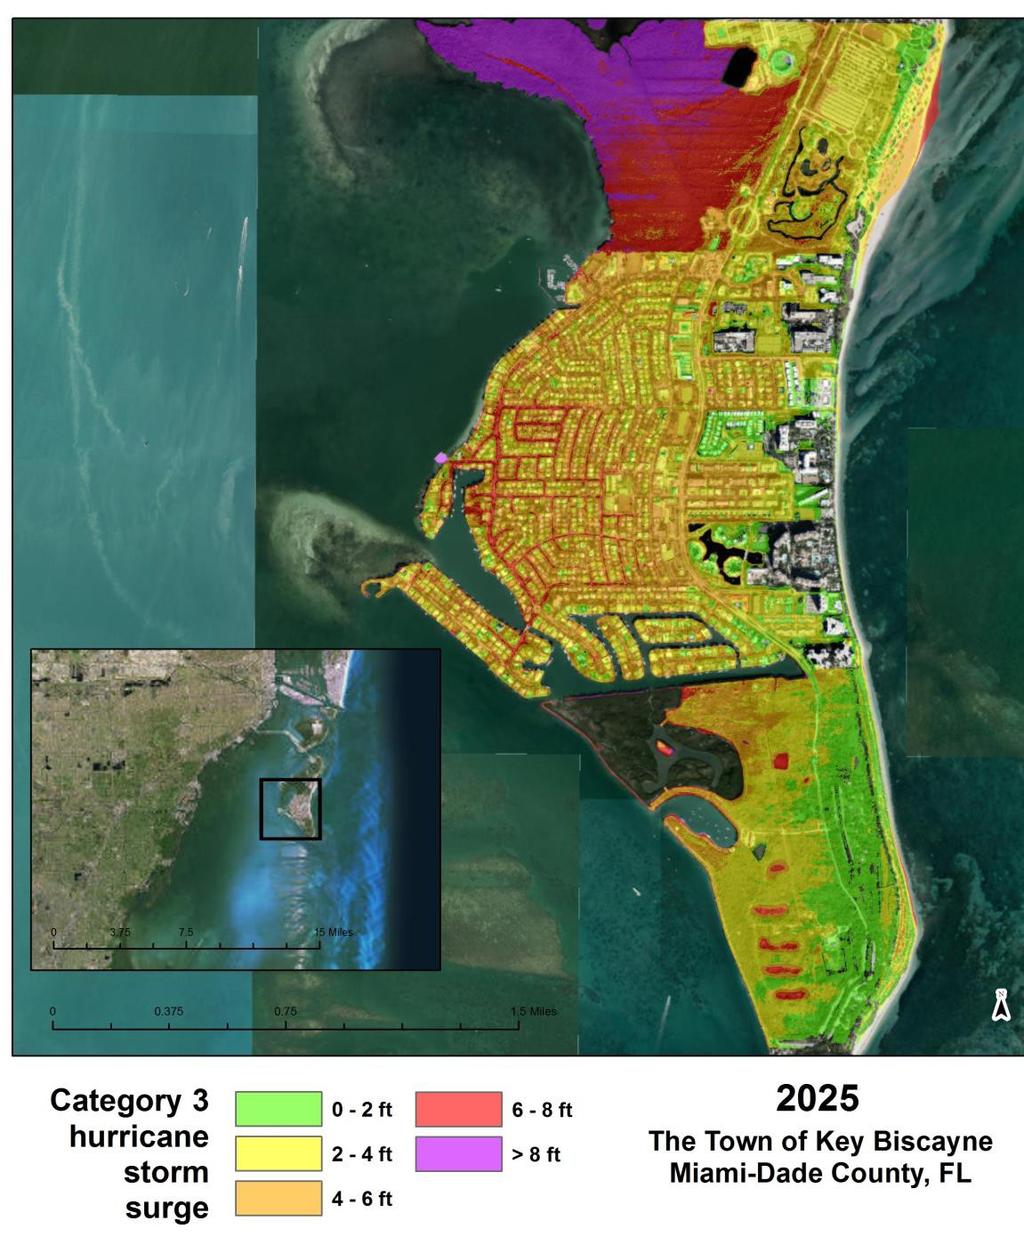 2025 The Village of Key Biscayne Miami-Dade County, FL Fig. 10.